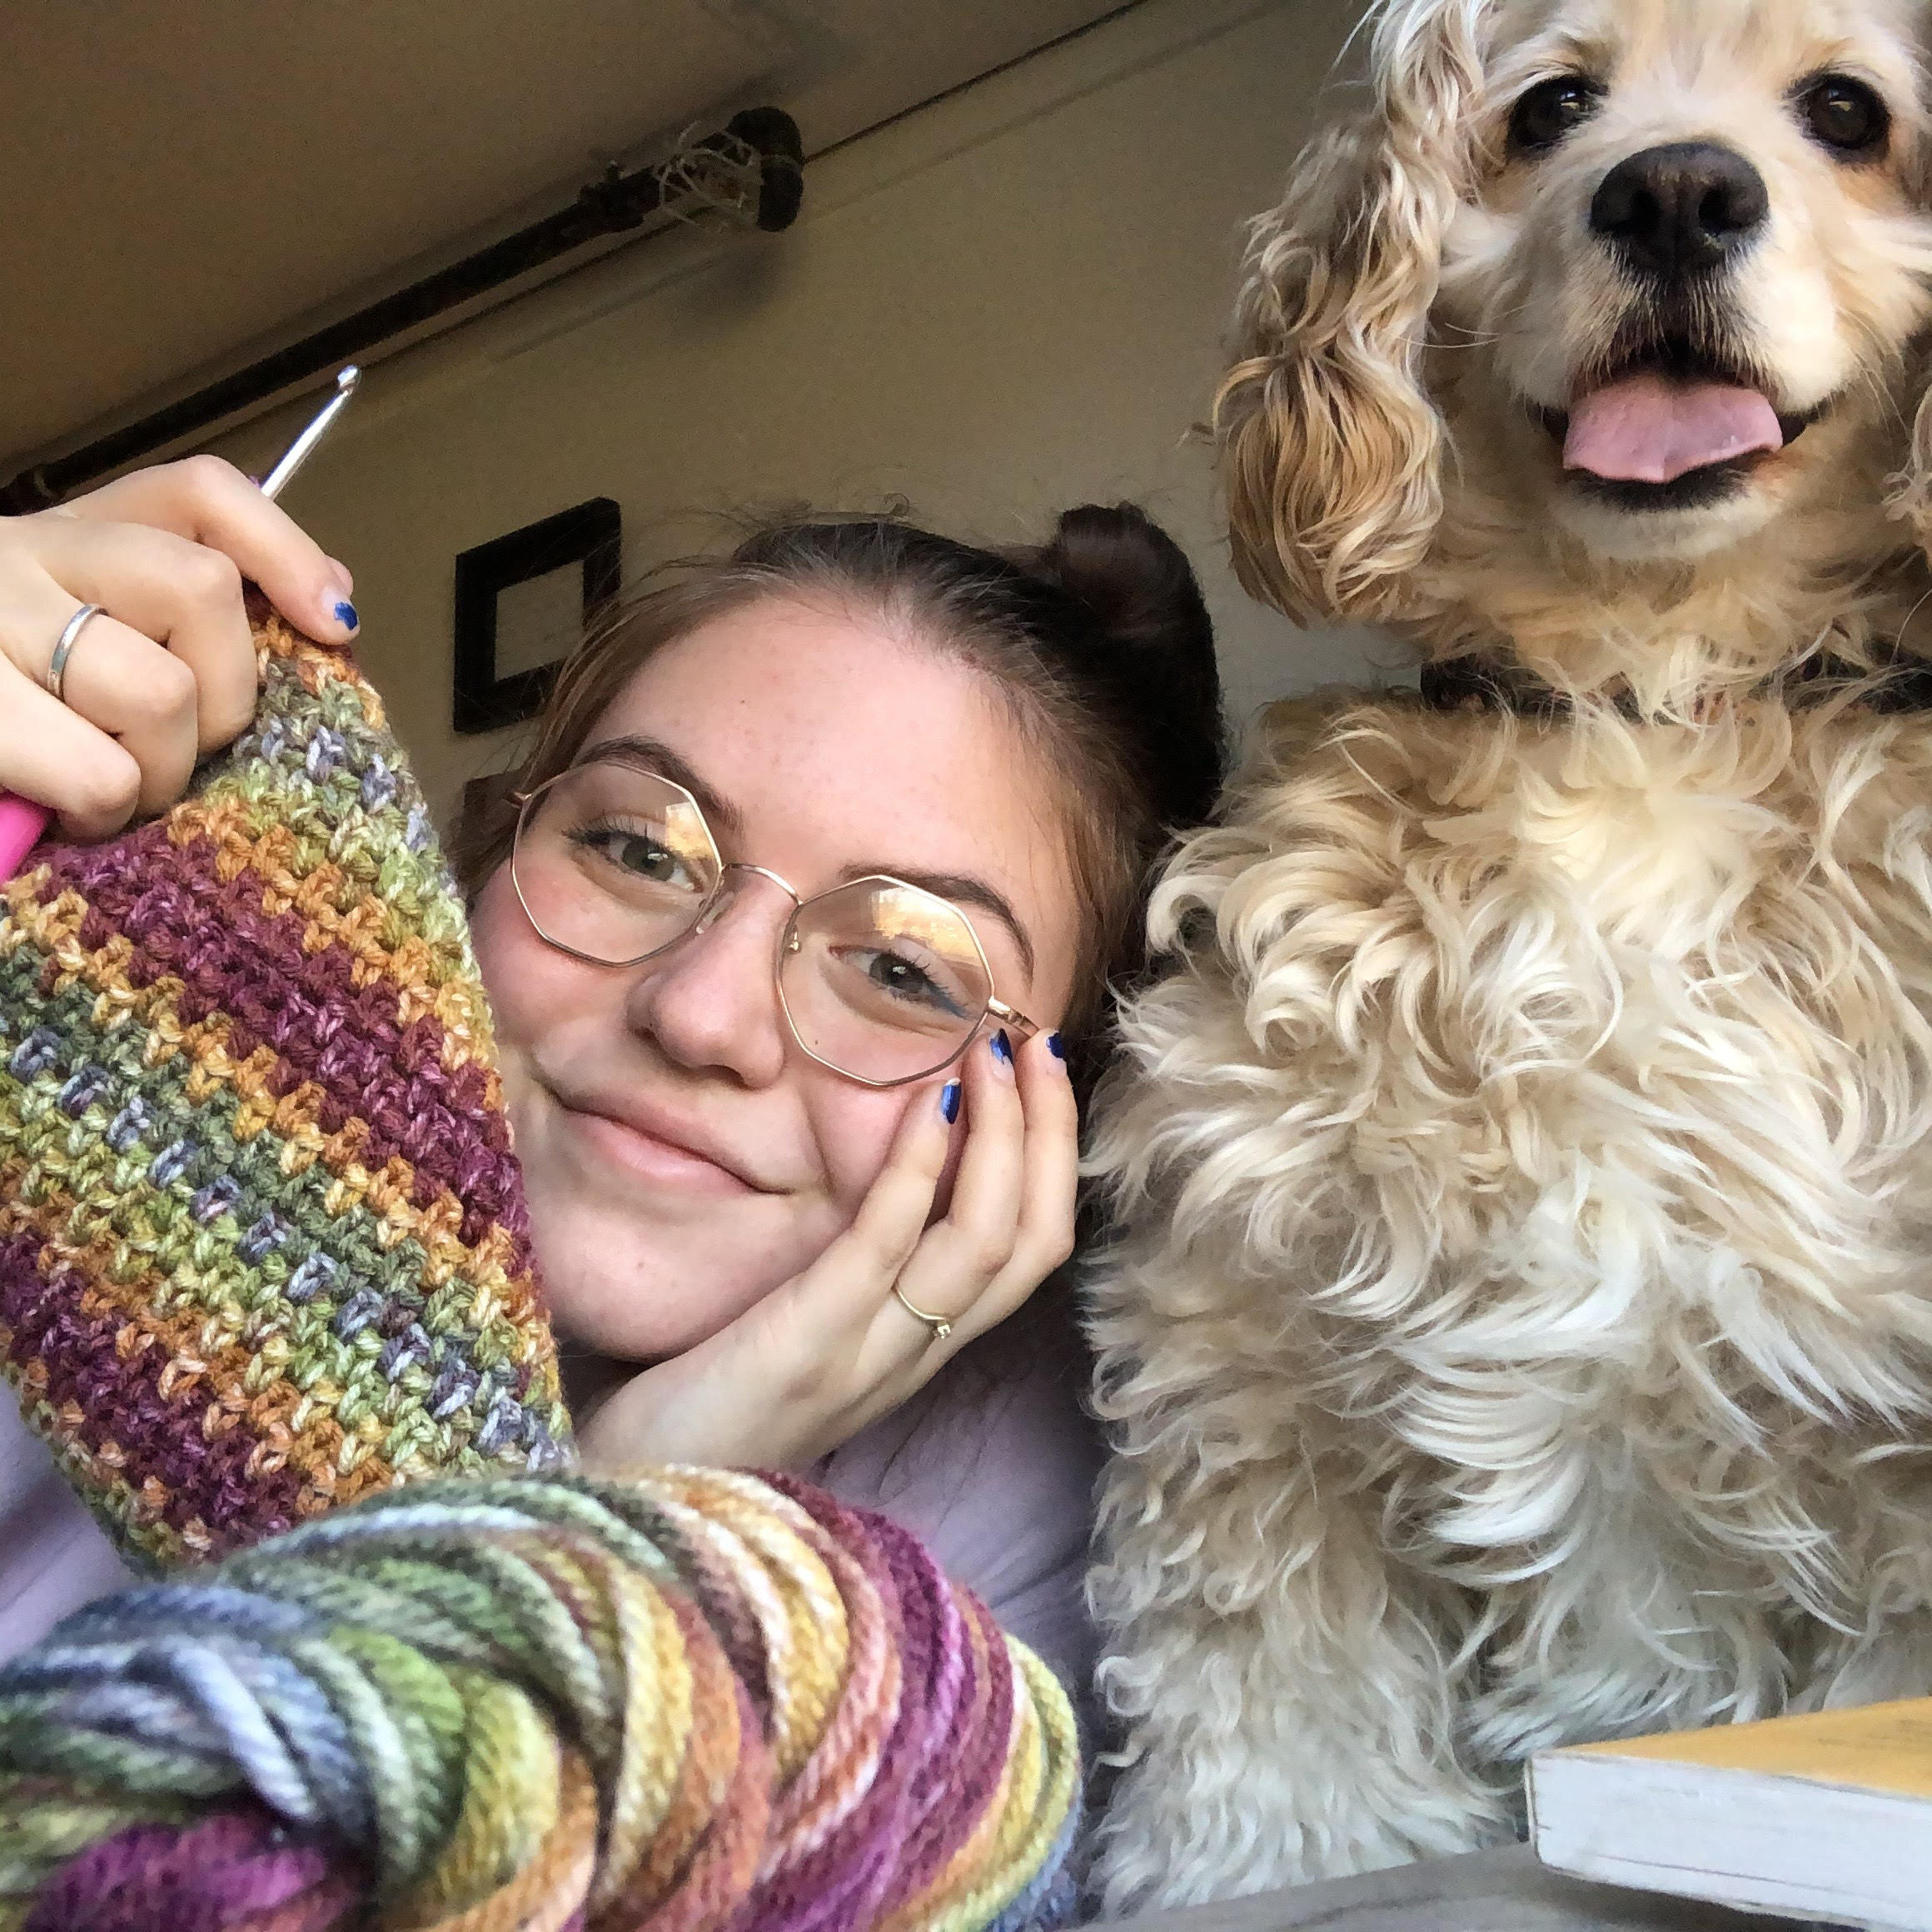 Co-President Maddie Tucker with some crocheted fabric and her dog. (Courtesy of Maddie Tucker)